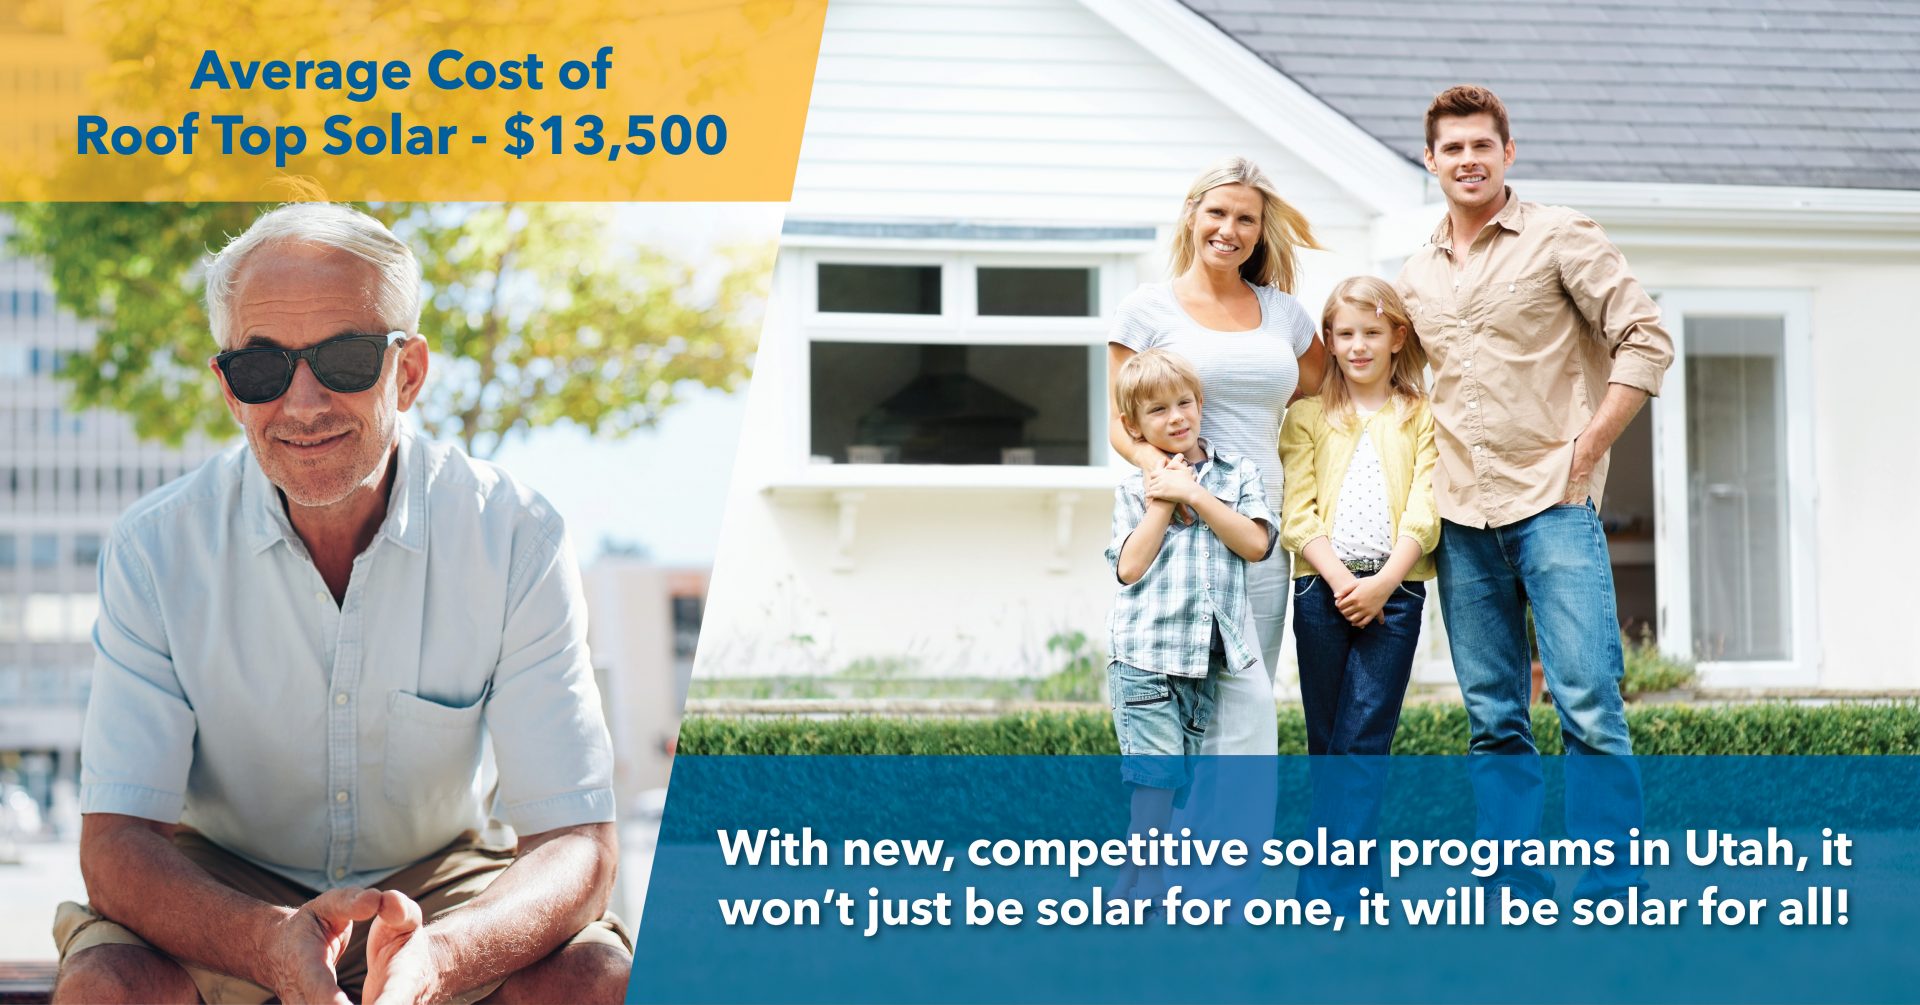 Solar Incentive Analysis Highlights Utah's Current Program and